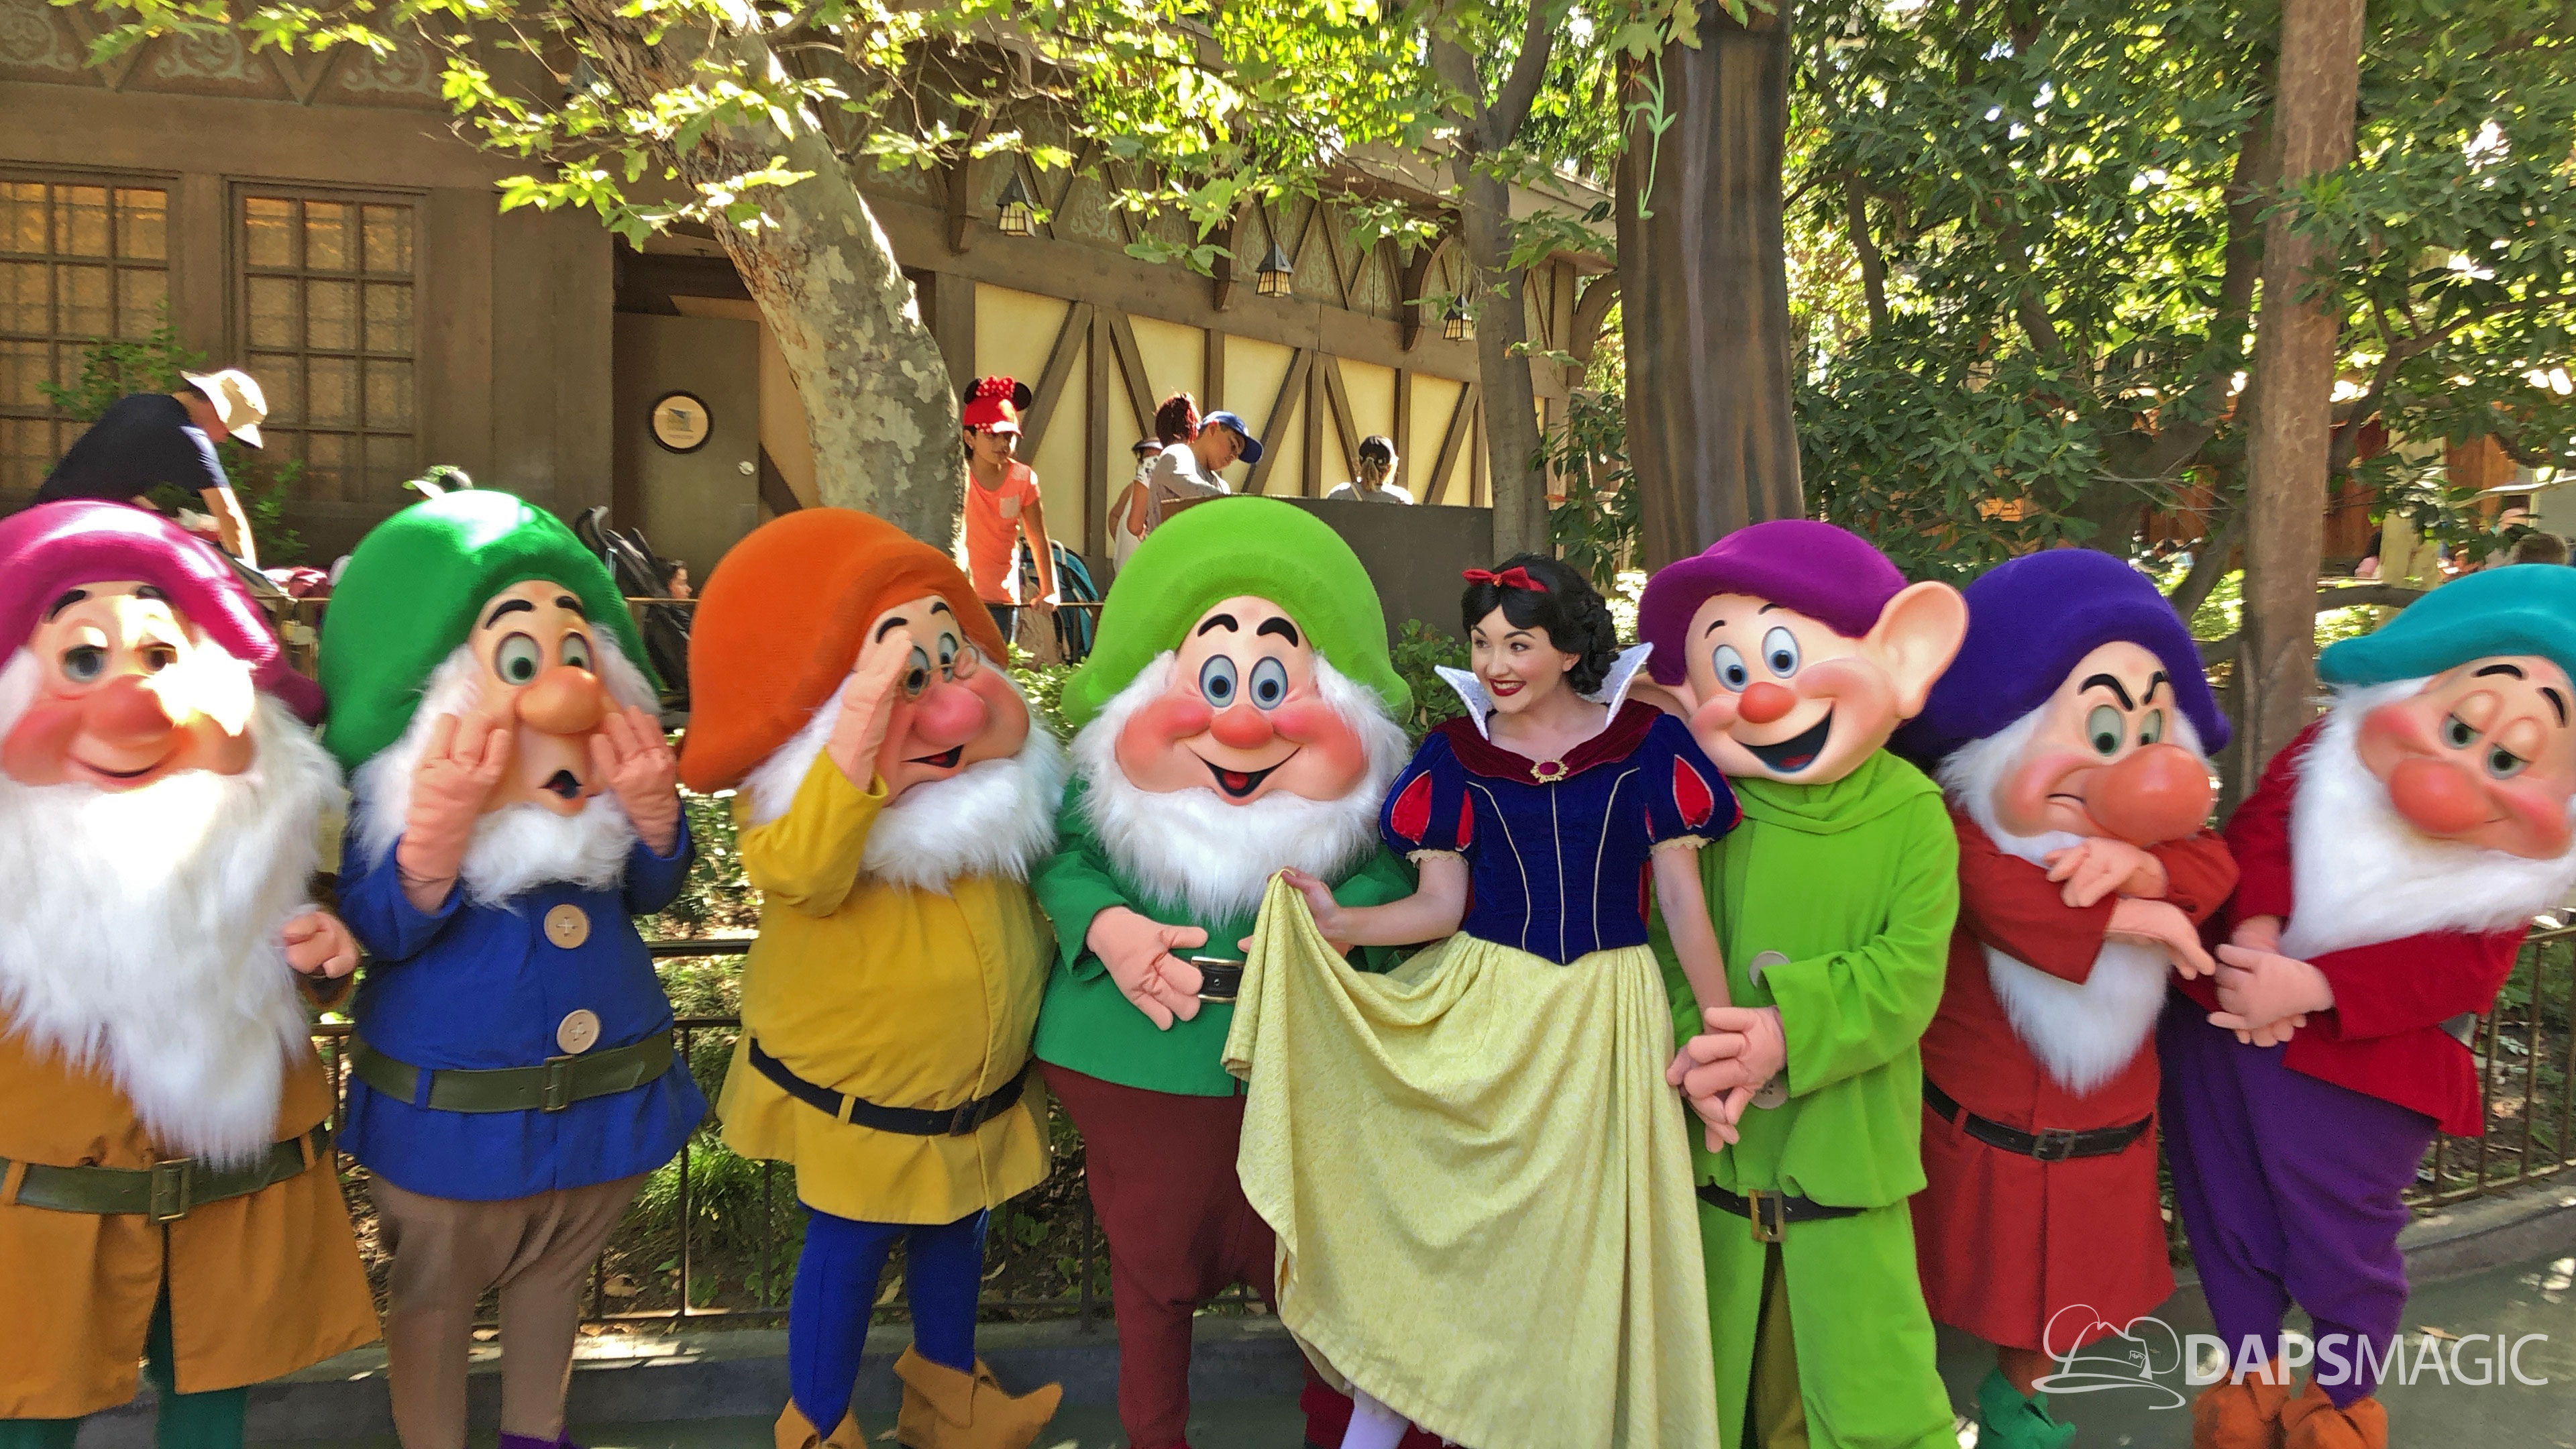 Snow White and the Seven Dwarfs Delight Guests in Special Appearance at Disneyland